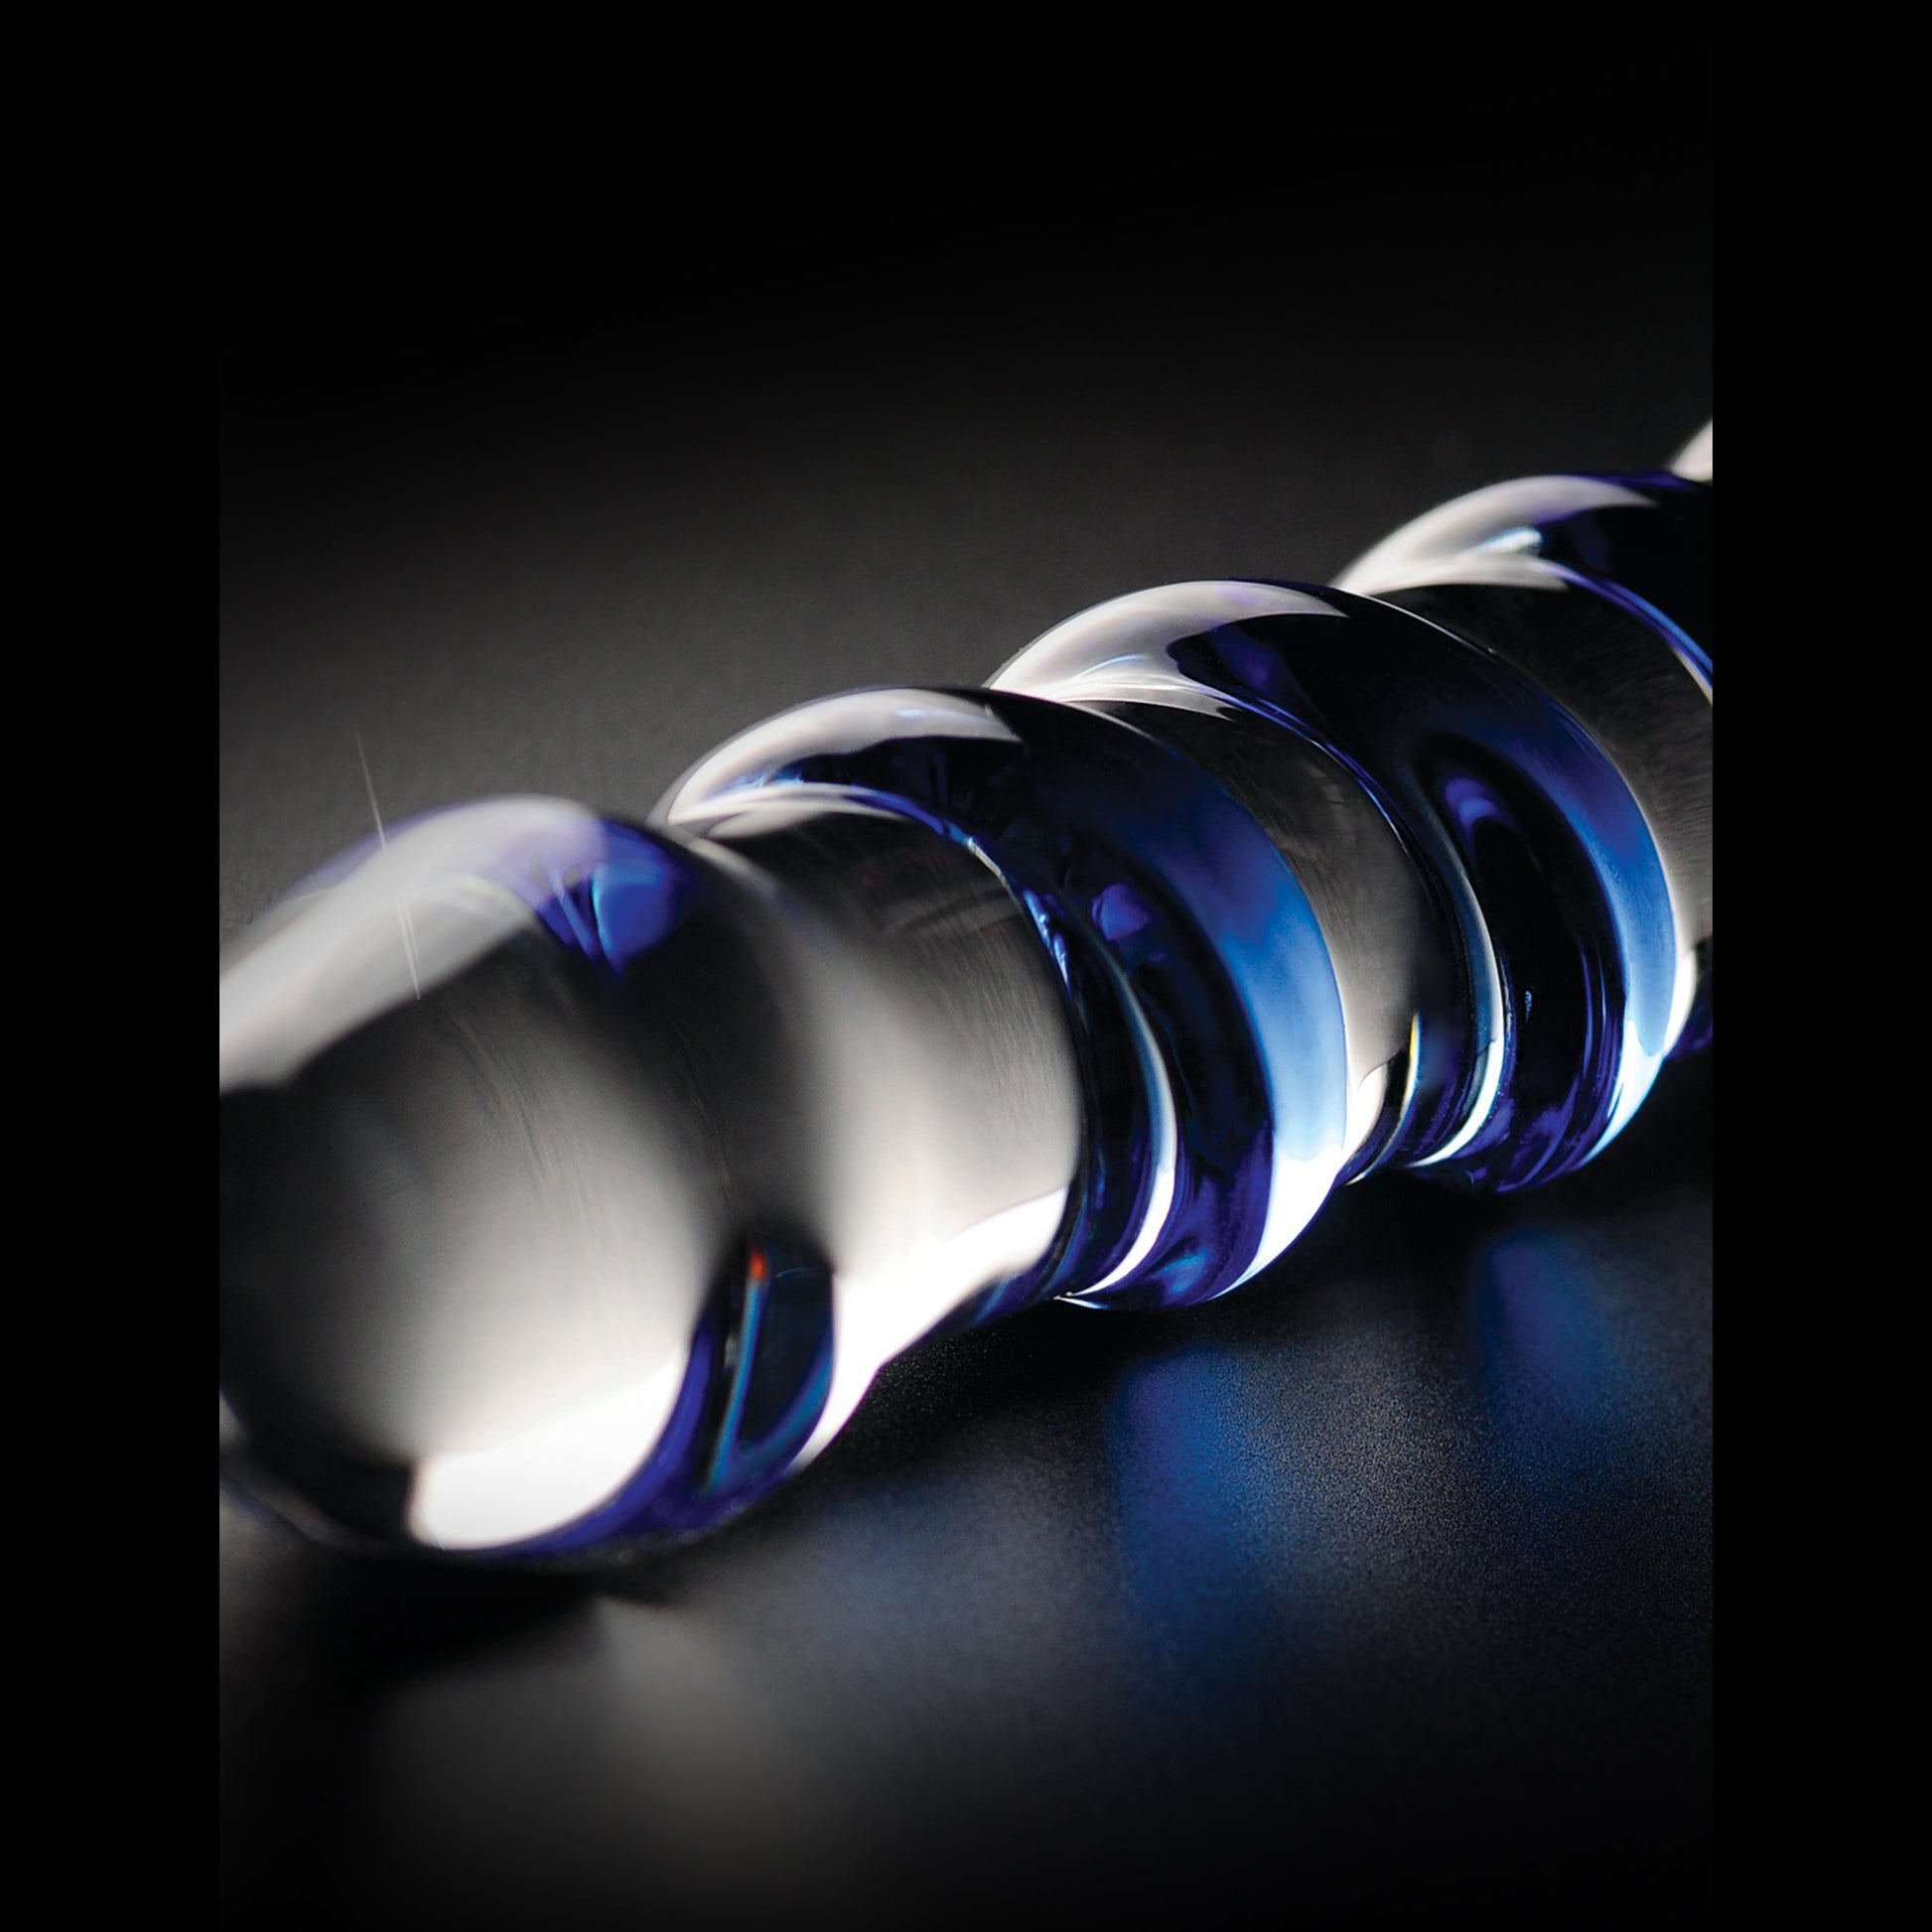 Icicles No. 5 Twister Swirl Glass Dong - Thorn & Feather Sex Toy Canada